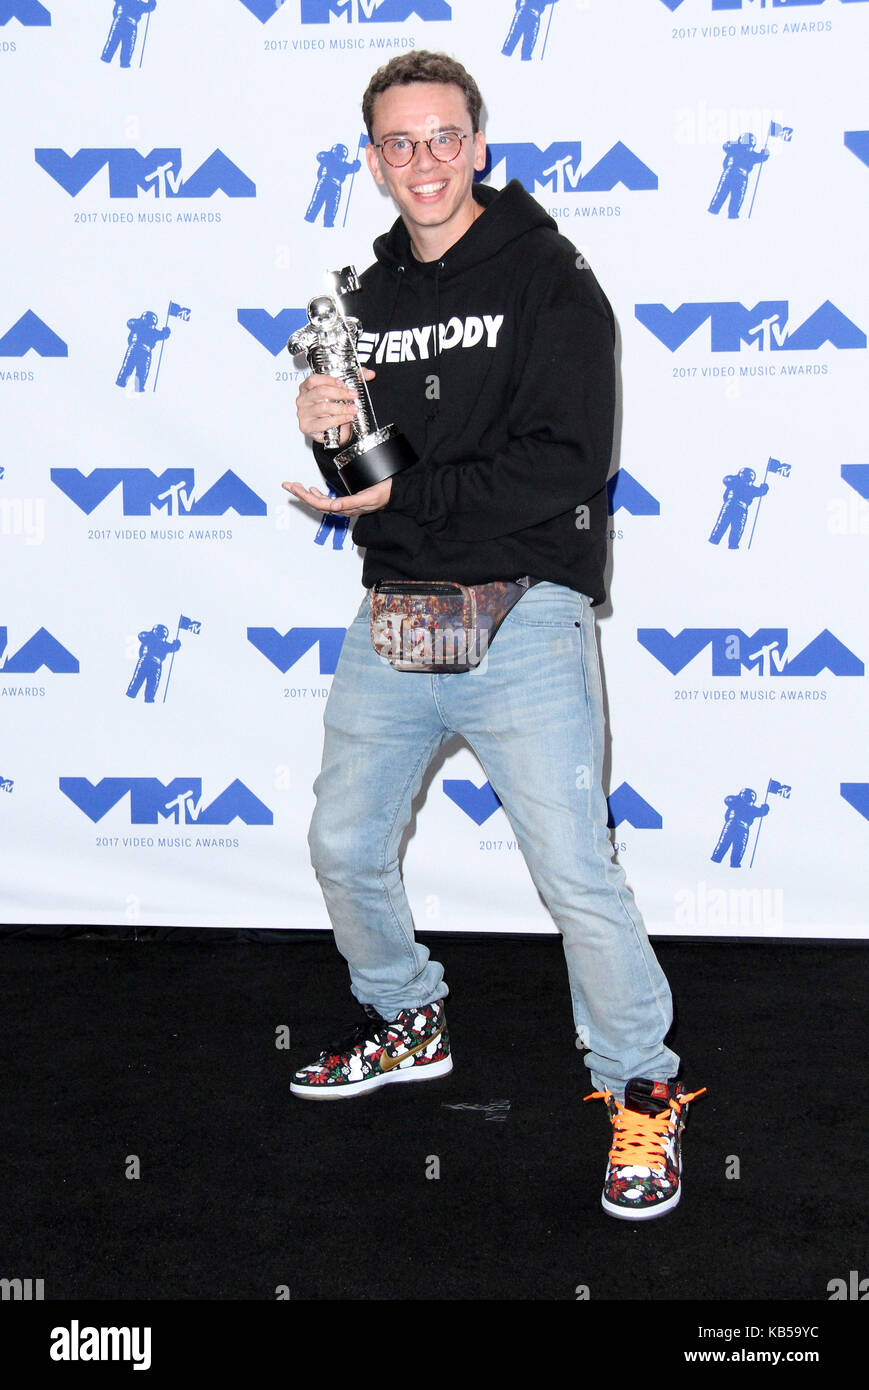 MTV Video Music Awards (VMA) 2017 Press Room held at the Forum in  Inglewood, California. Featuring: